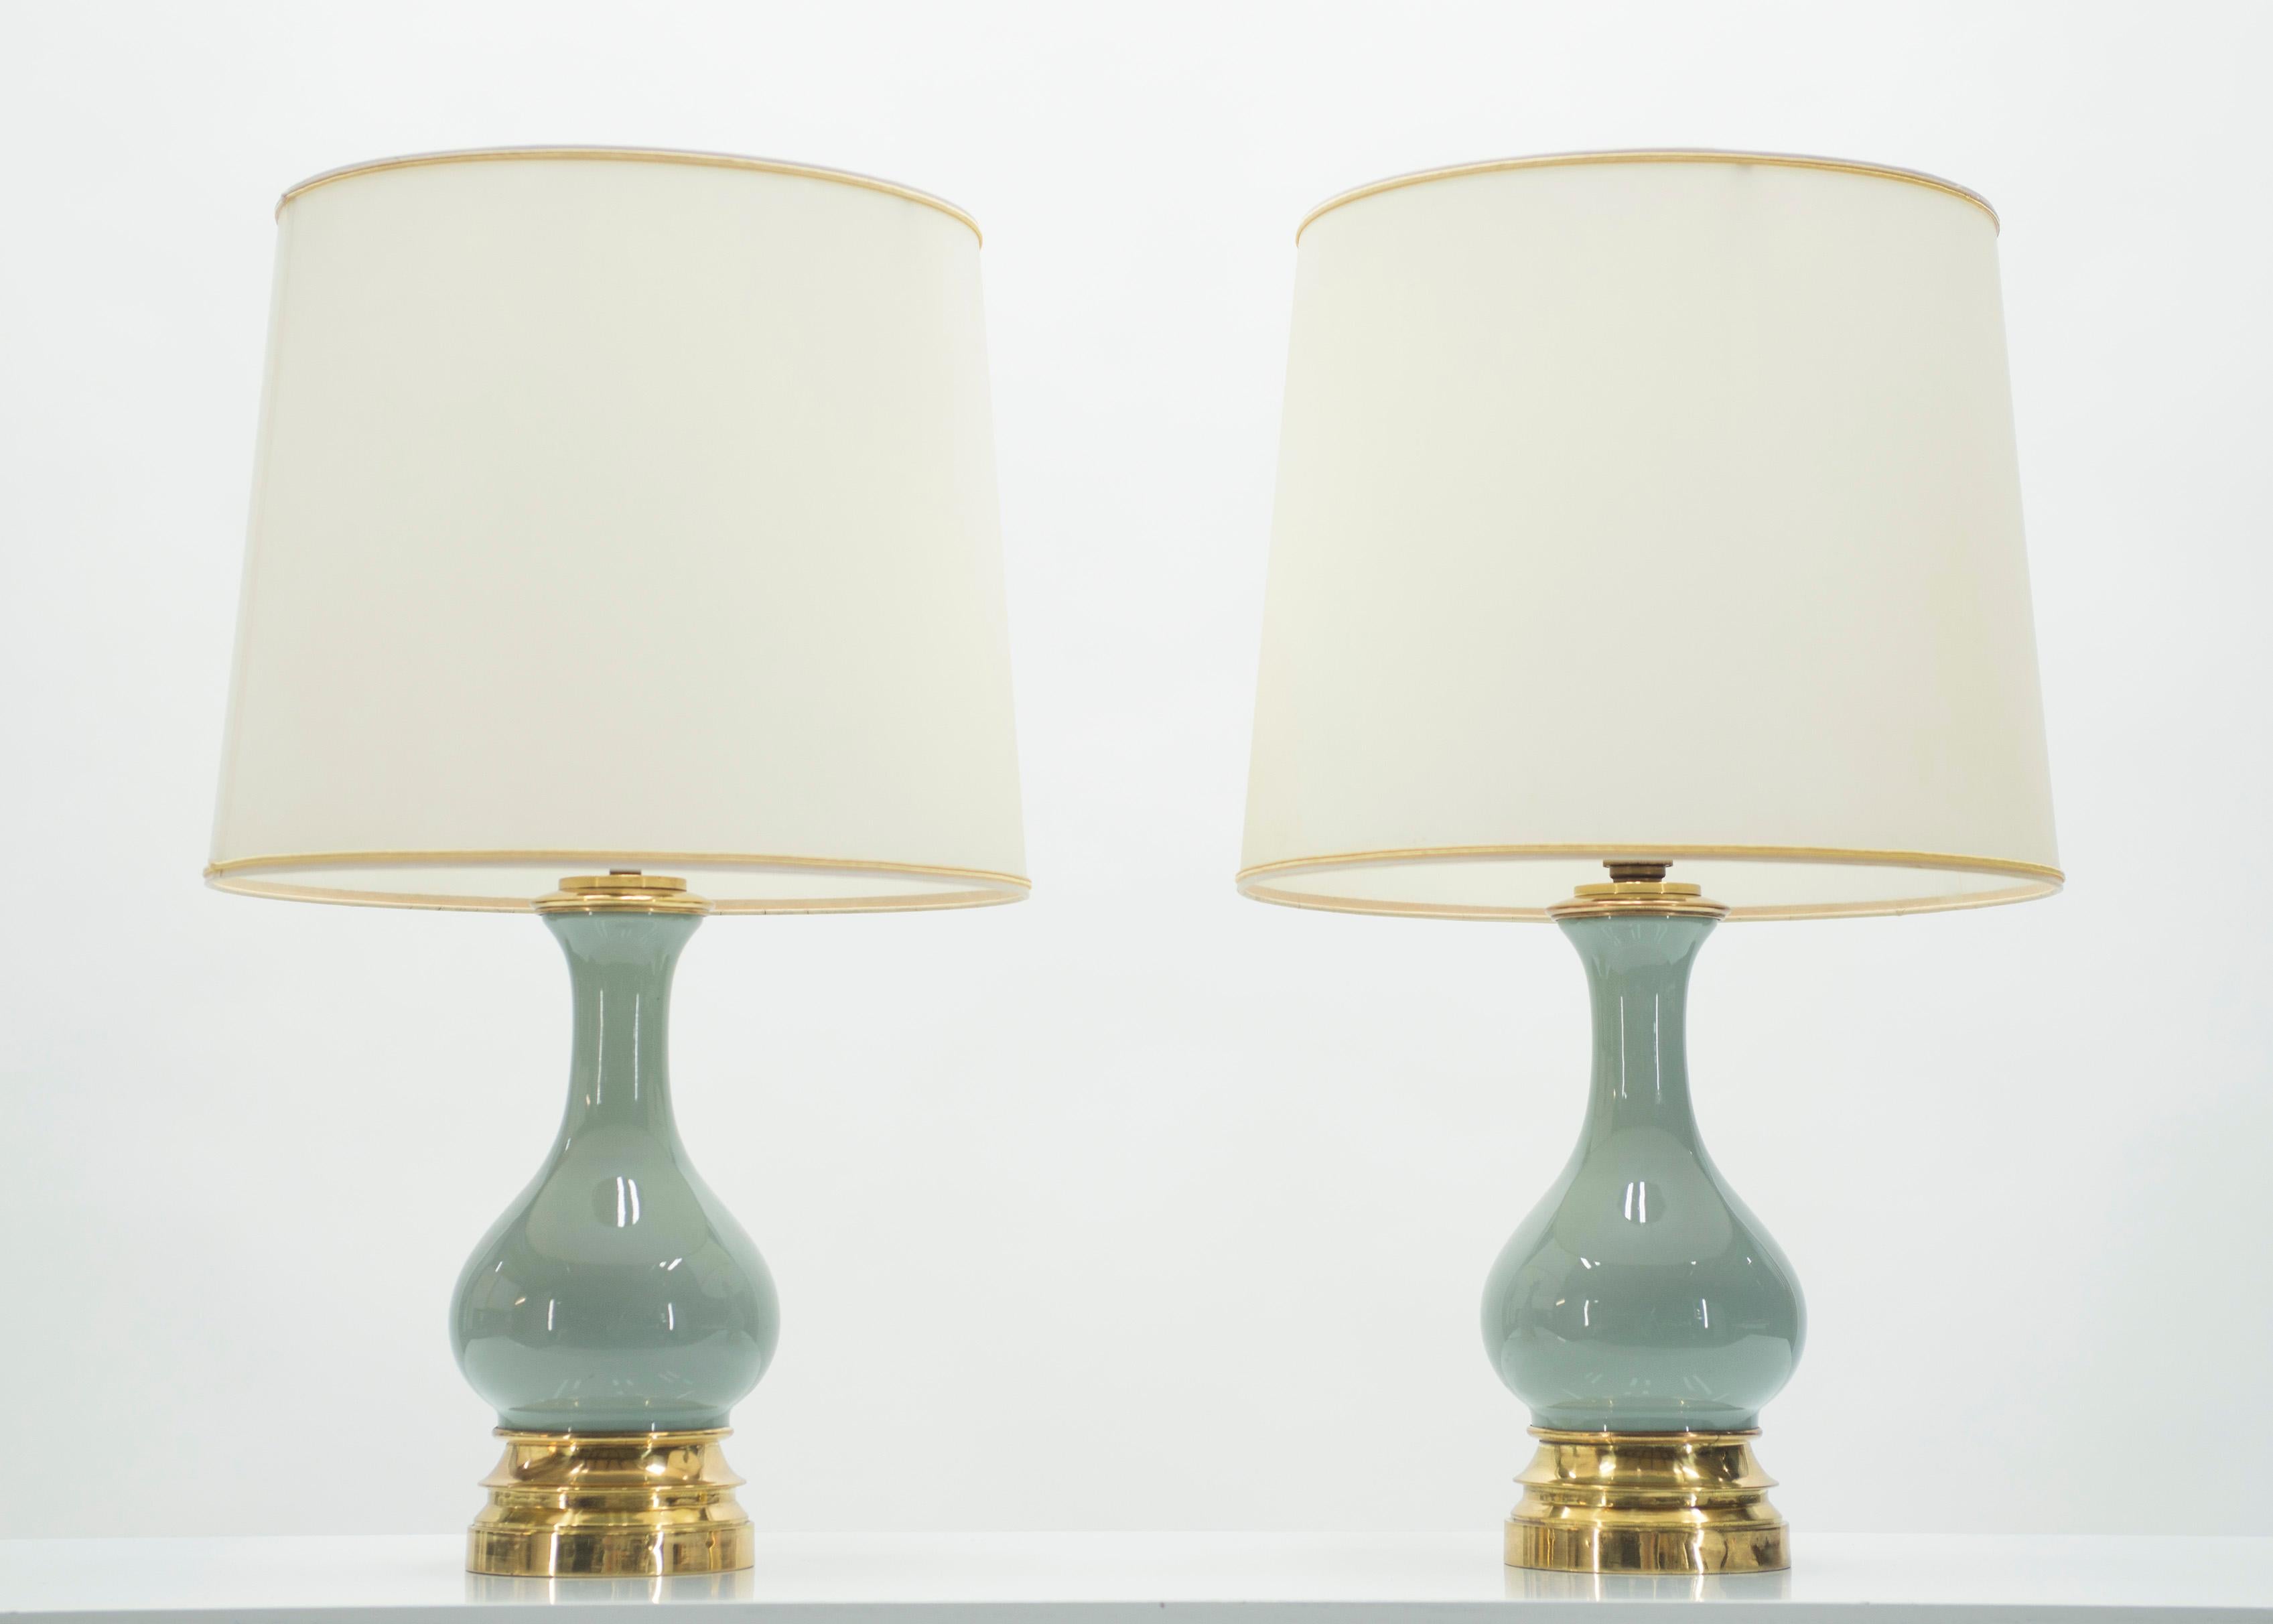 All understated luxury, this pair of 1950s French bedside lamps boast the exquisite craftsmanship characteristic of midcentury French ceramics. Featuring elegantly rounded curves with distinguished brass feet, the ceramic subtly captures the light